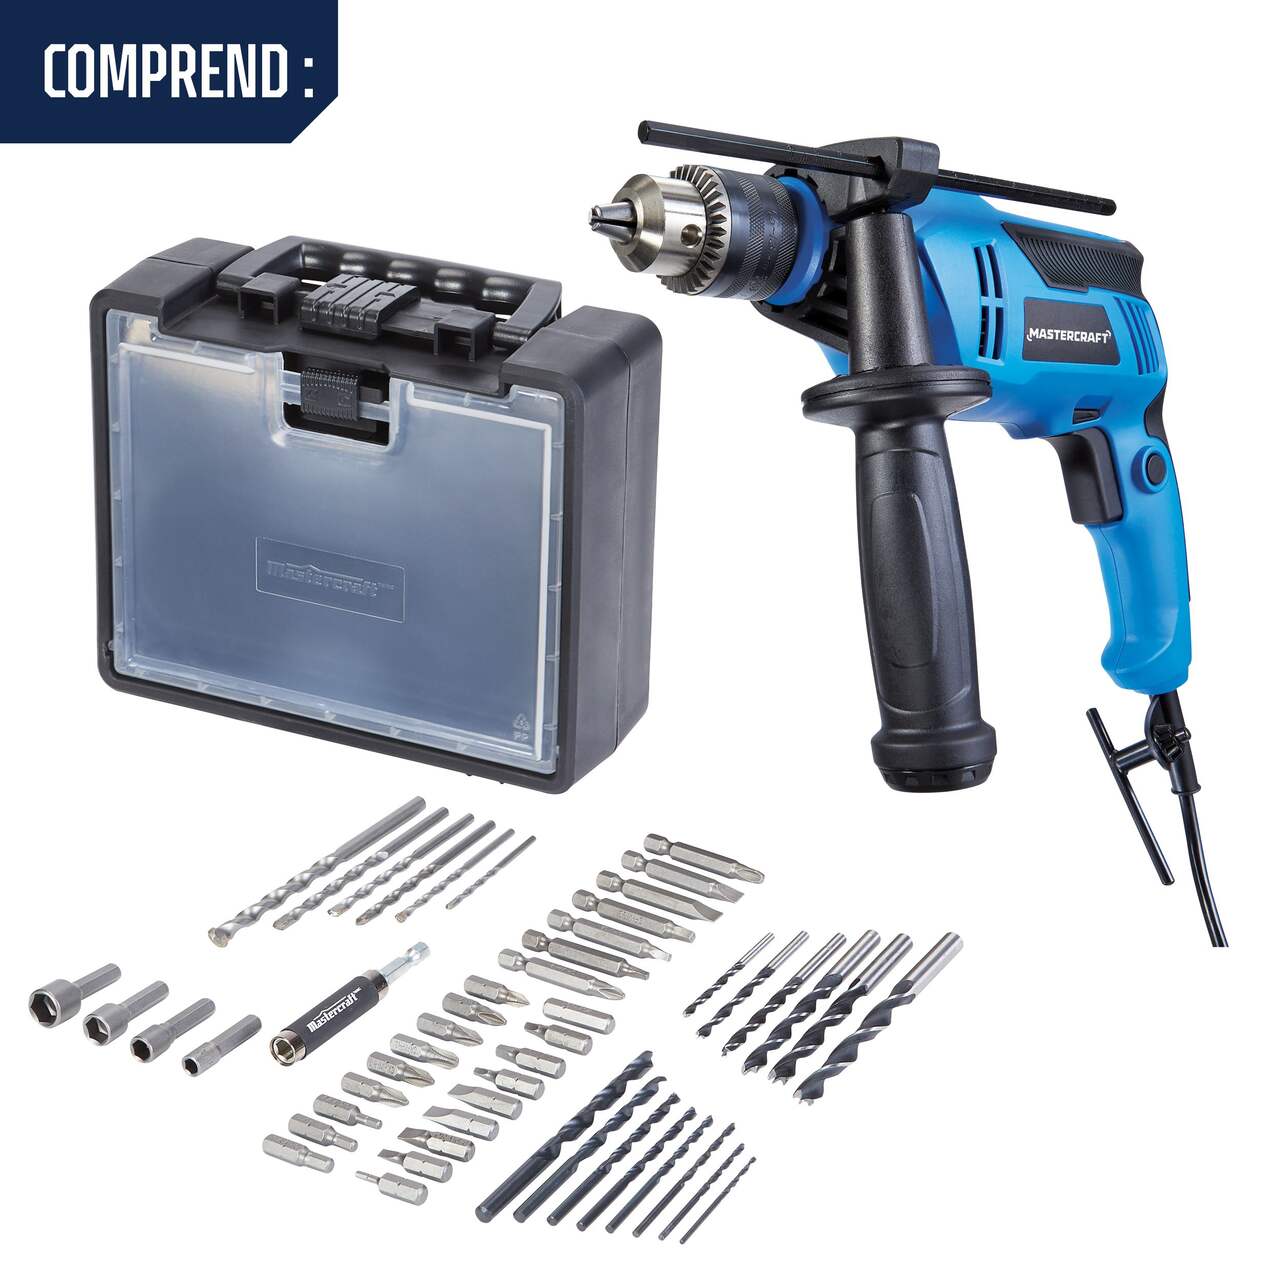 MAXIMUM 5.5A Corded Variable Speed Rotary Hammer Drill with Auxiliary  Handle & SDS+, 5/8-in